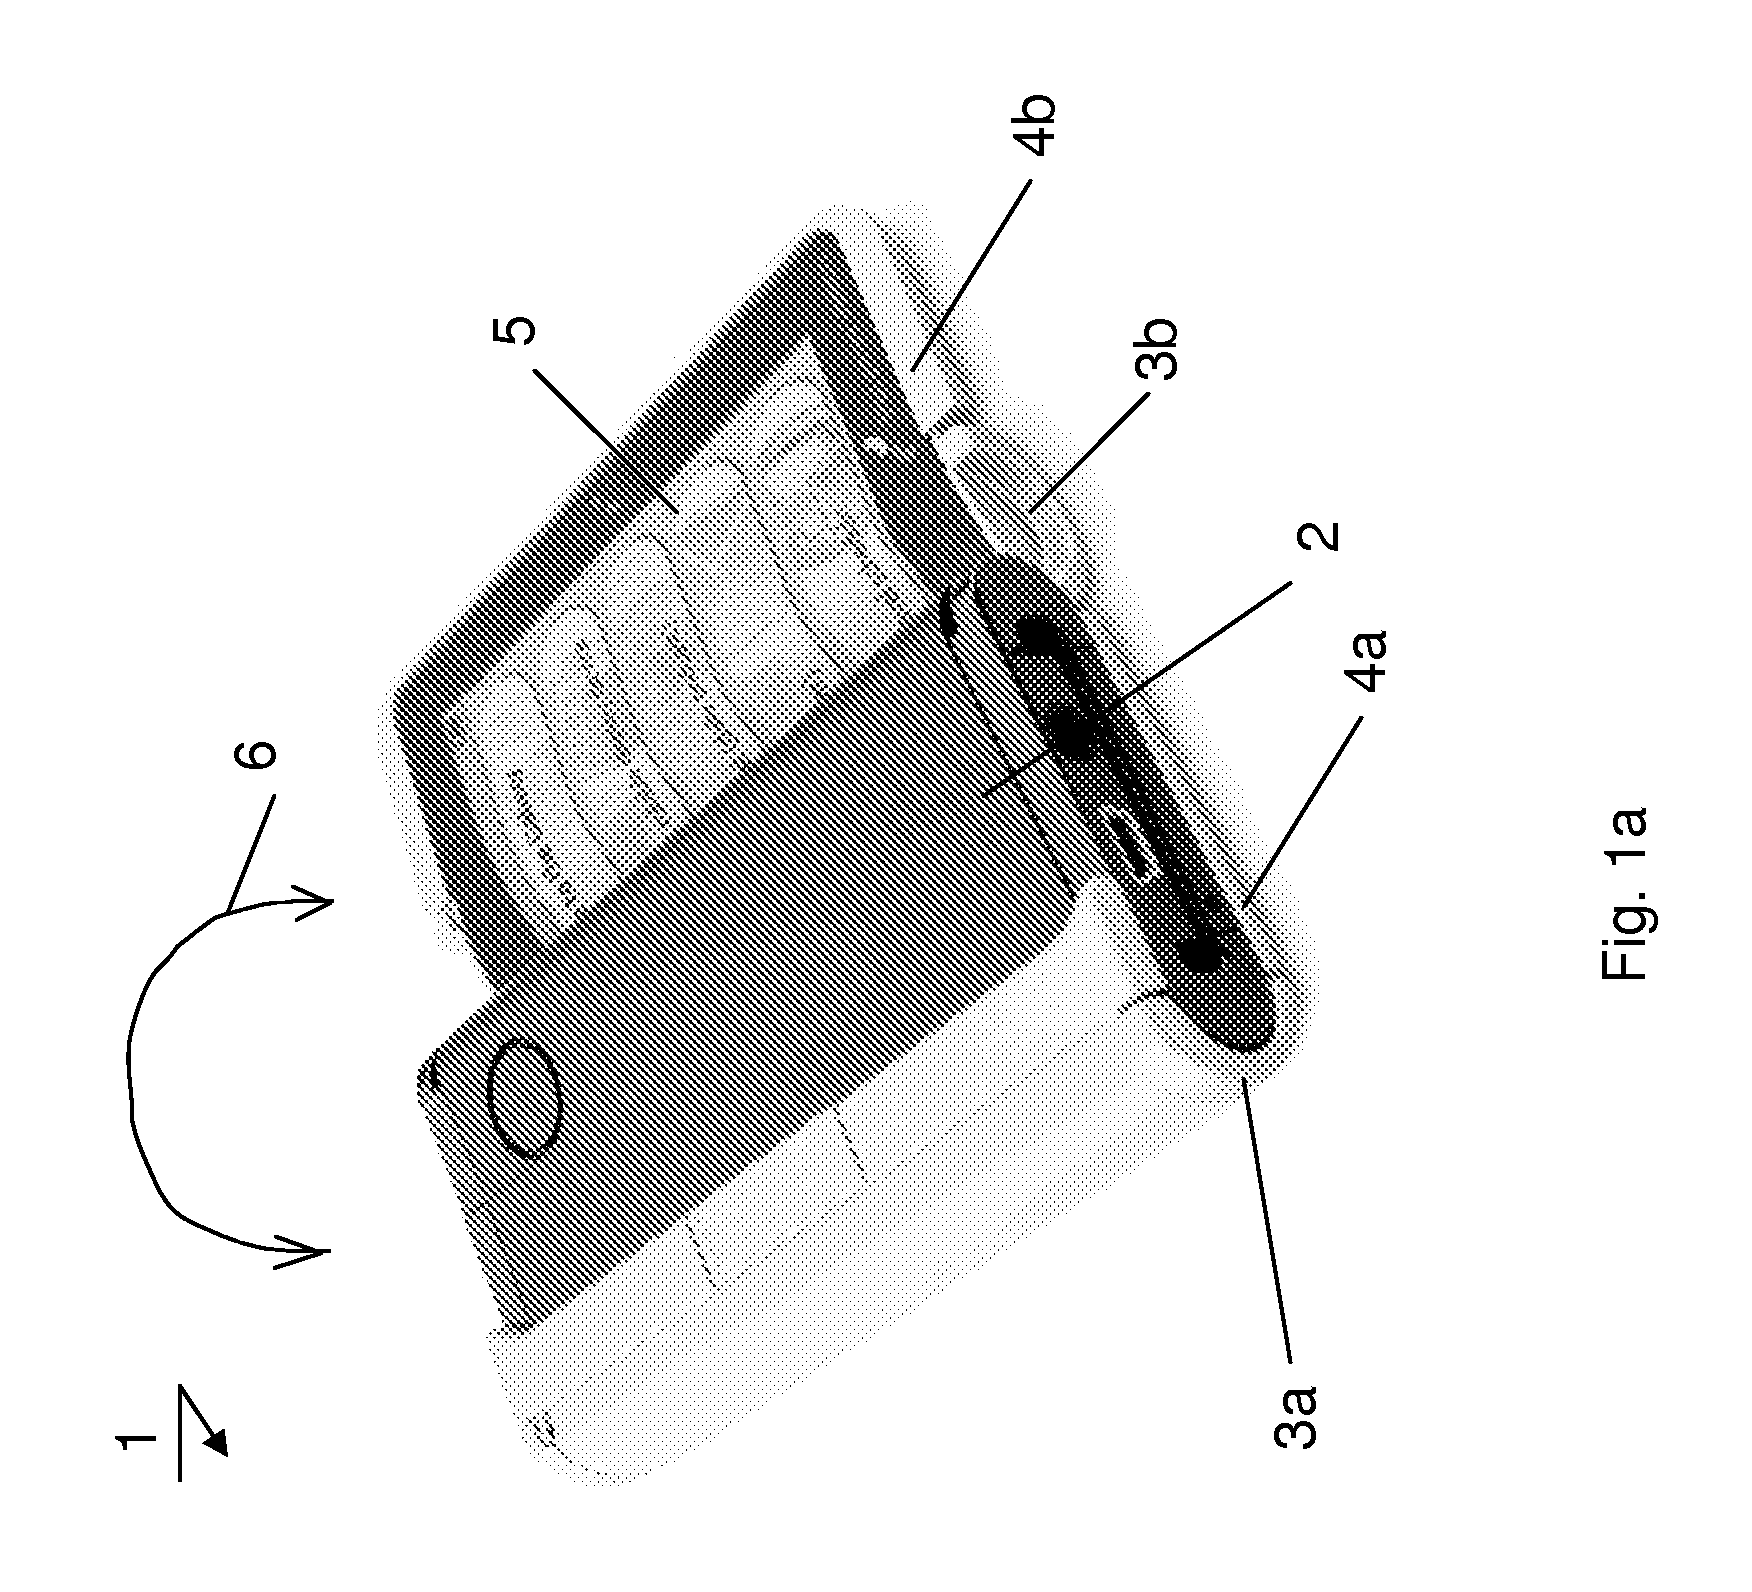 Electronic apparatus with improved functionality